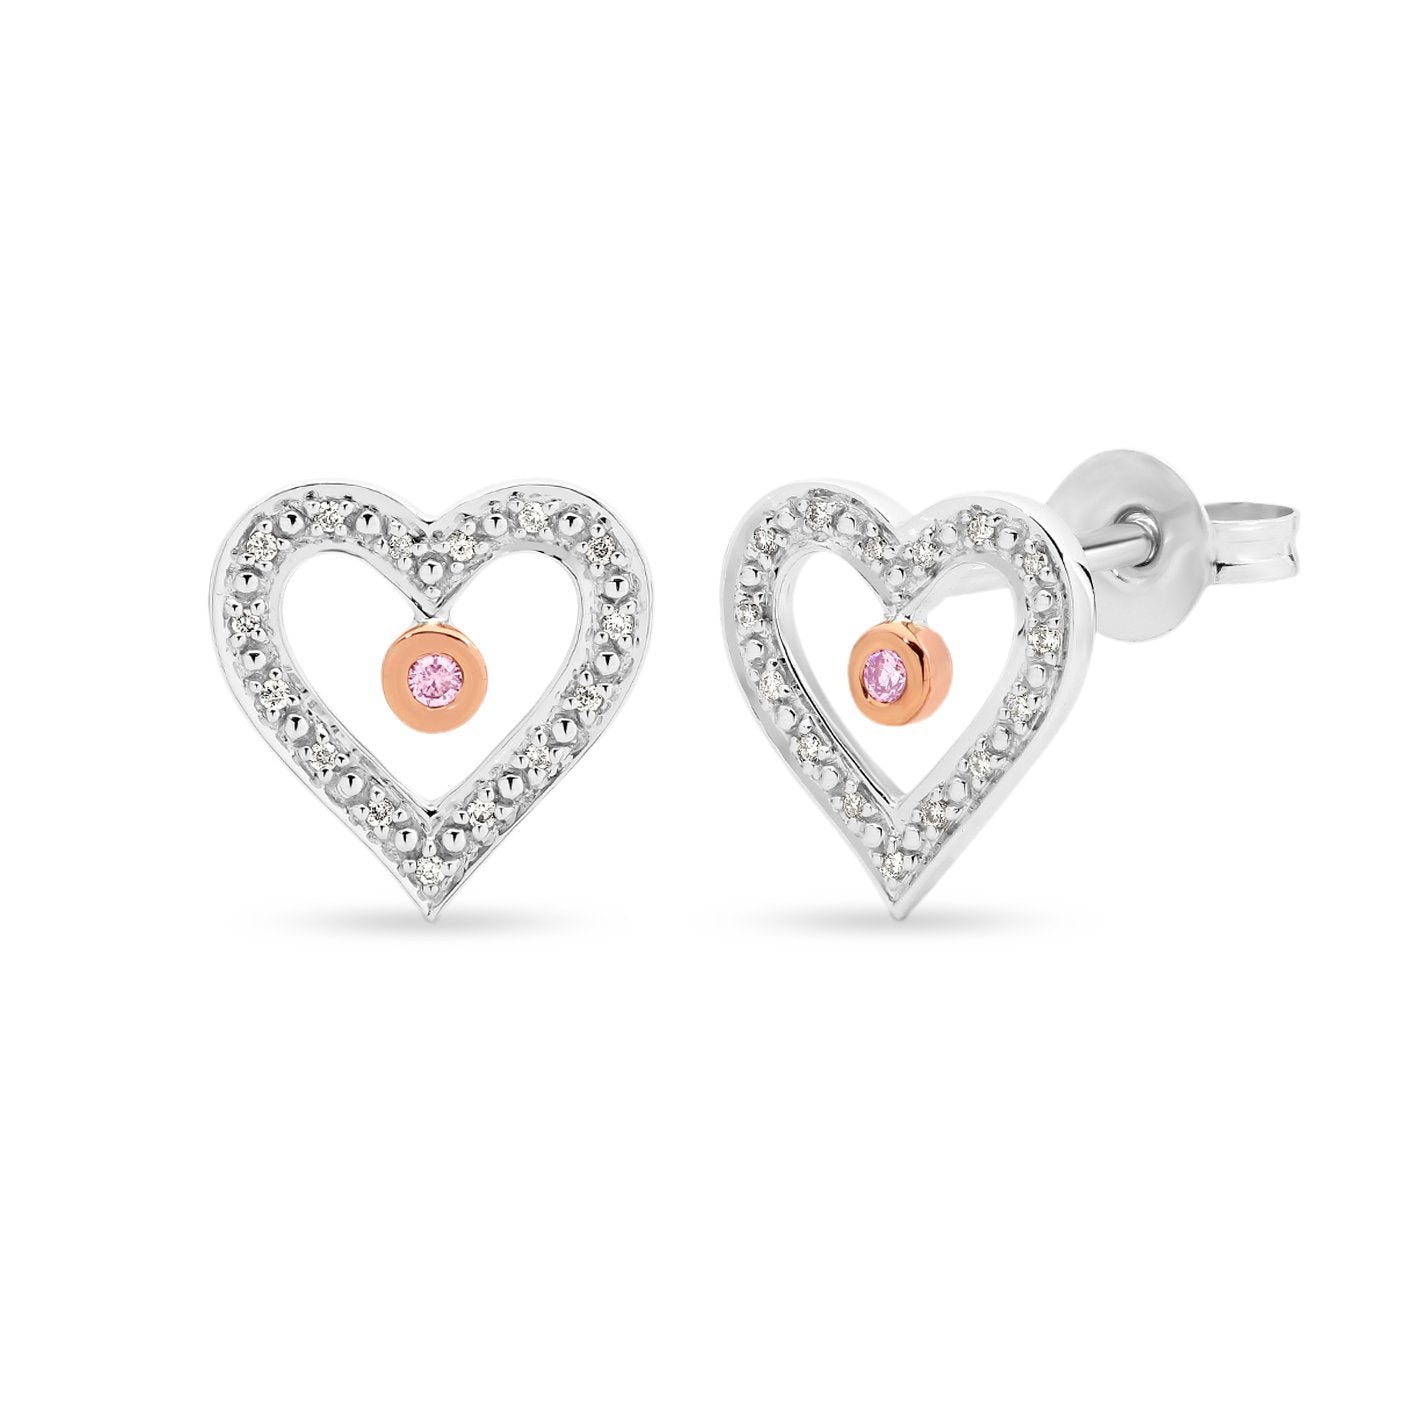 PINK CAVIAR 0.08ct Pink Diamond Earrings in 9ct White Gold